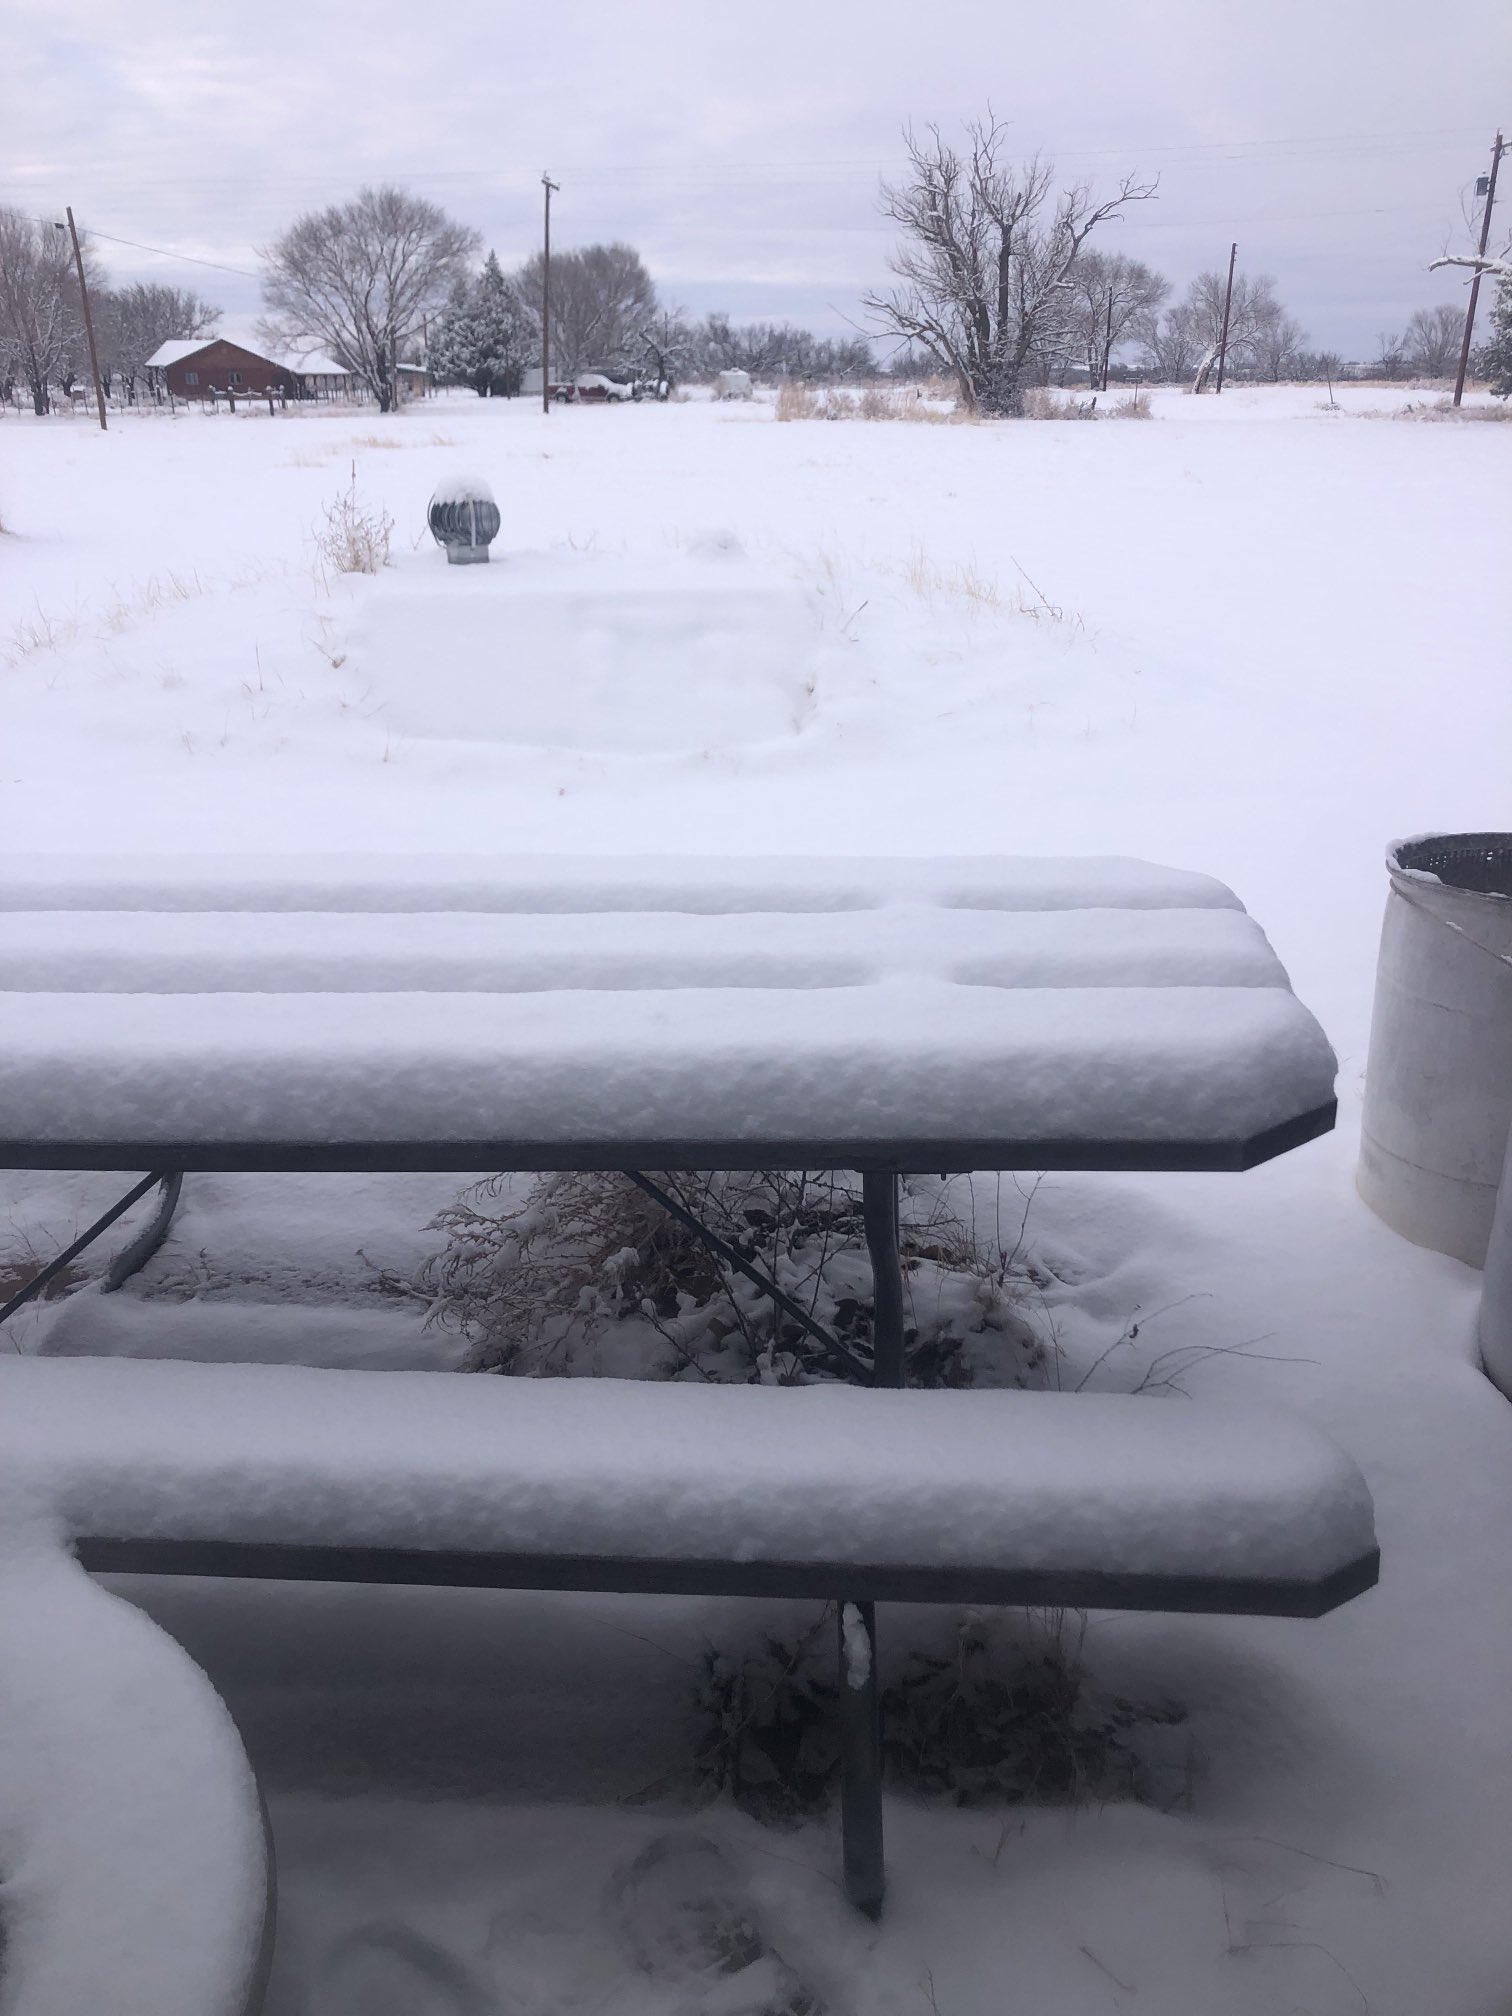 Wintry scene near Estelline, Texas, Wednesday afternoon (26 January 2022). Over 4" of snow fell during the afternoon hours. The image is courtesy of Craig Collins.